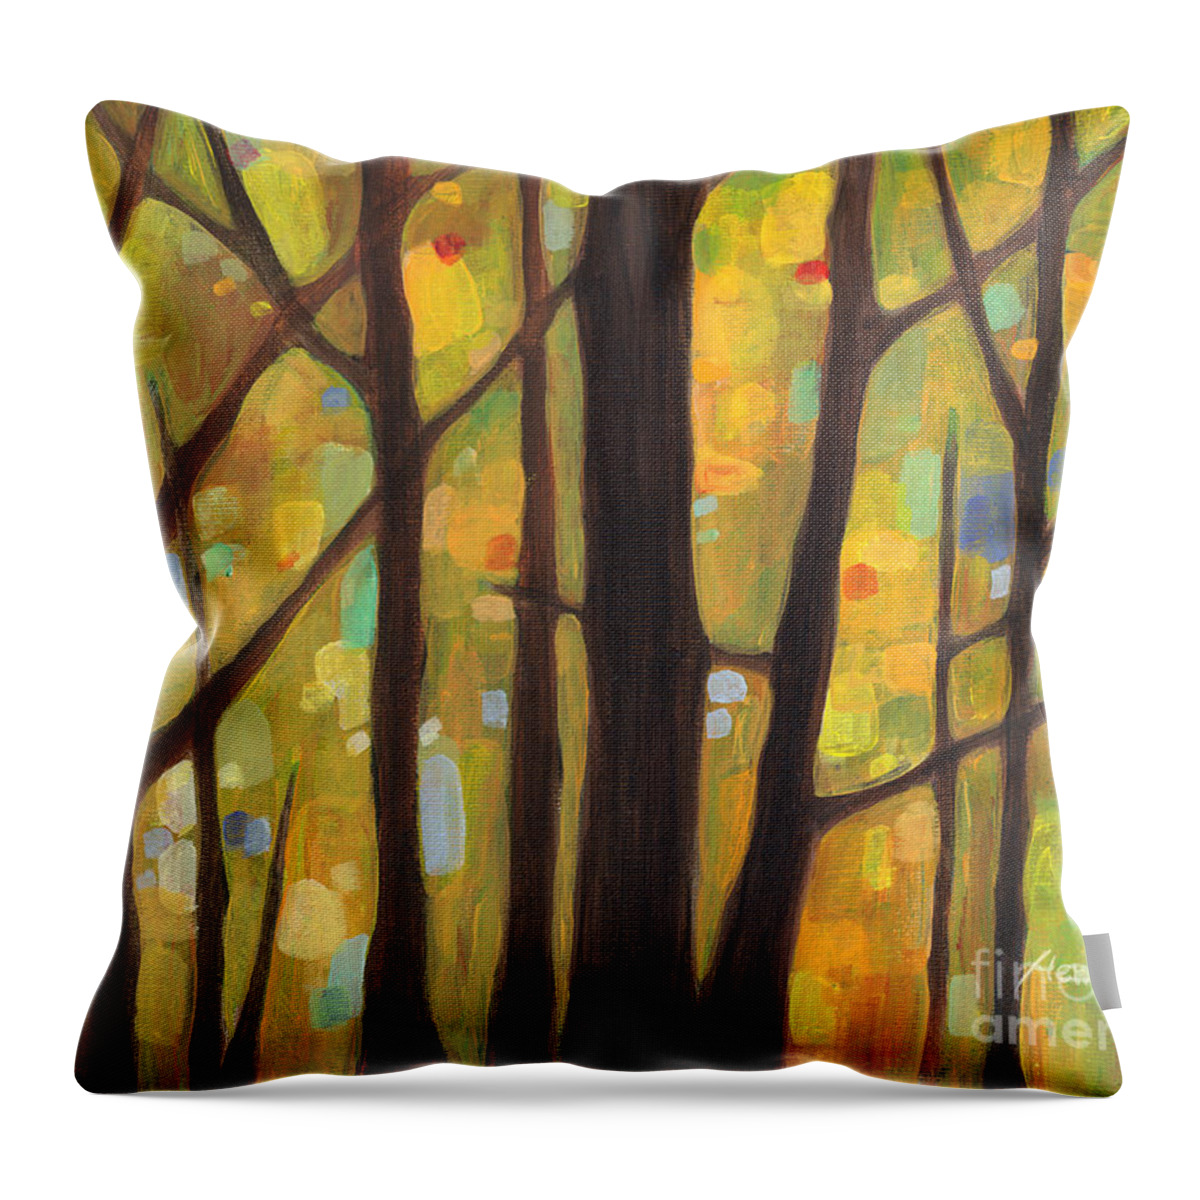 Dreaming Throw Pillow featuring the painting Dreaming Trees 1 by Hailey E Herrera